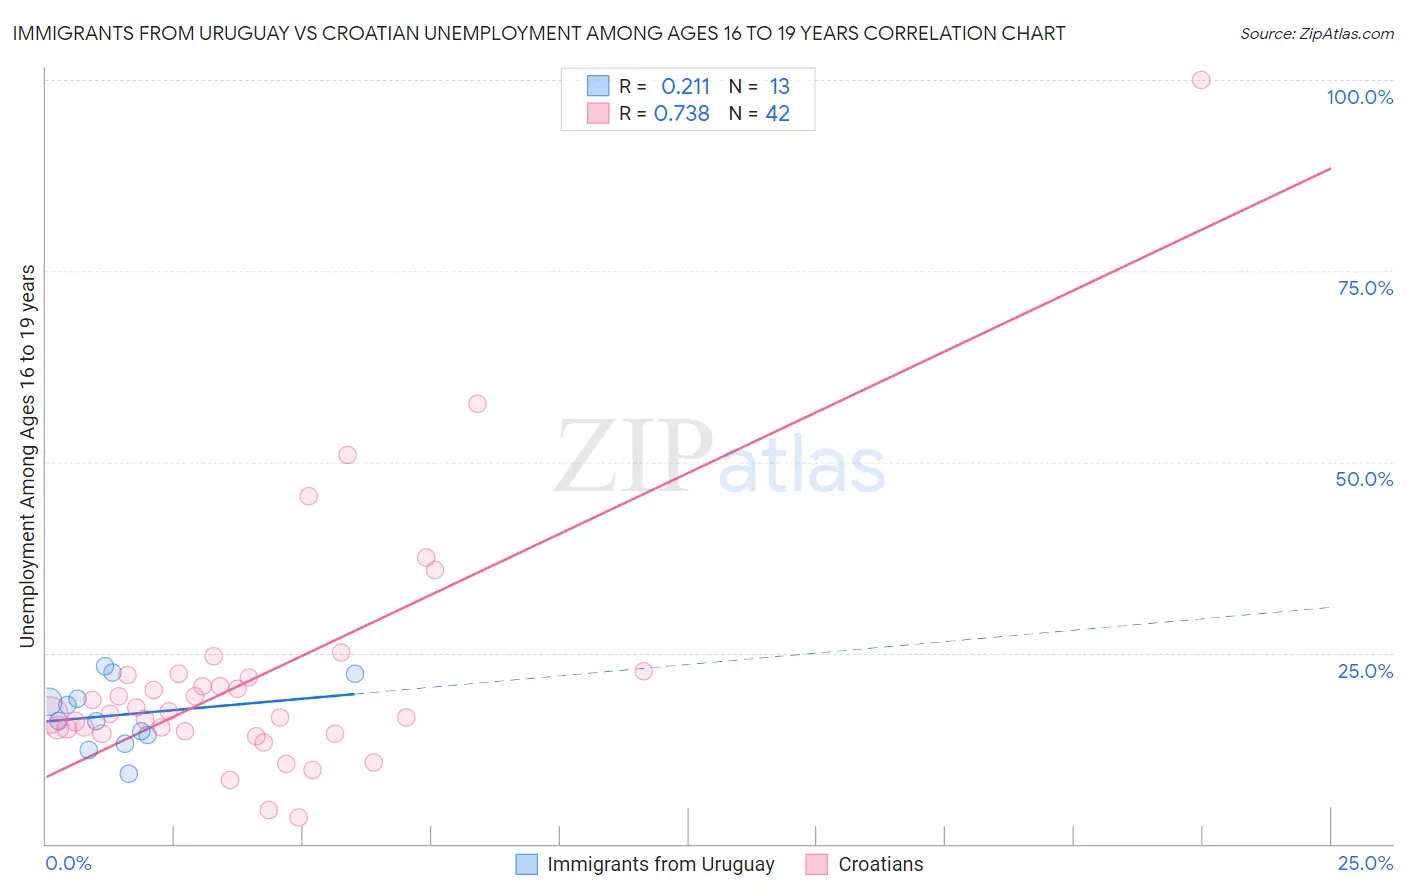 Immigrants from Uruguay vs Croatian Unemployment Among Ages 16 to 19 years